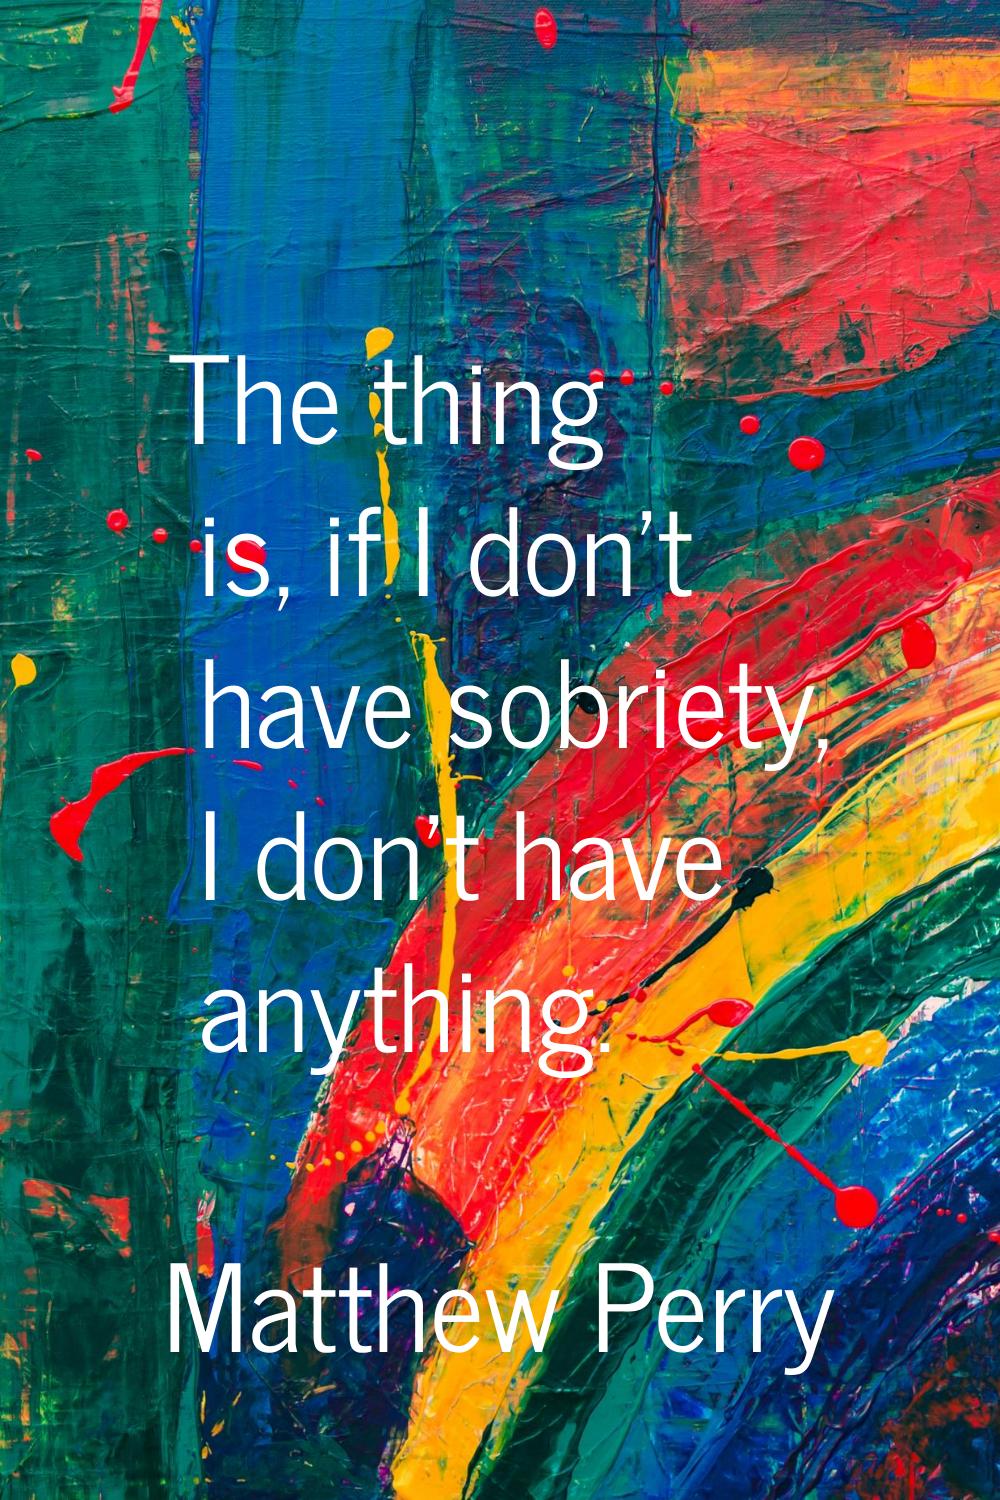 The thing is, if I don't have sobriety, I don't have anything.